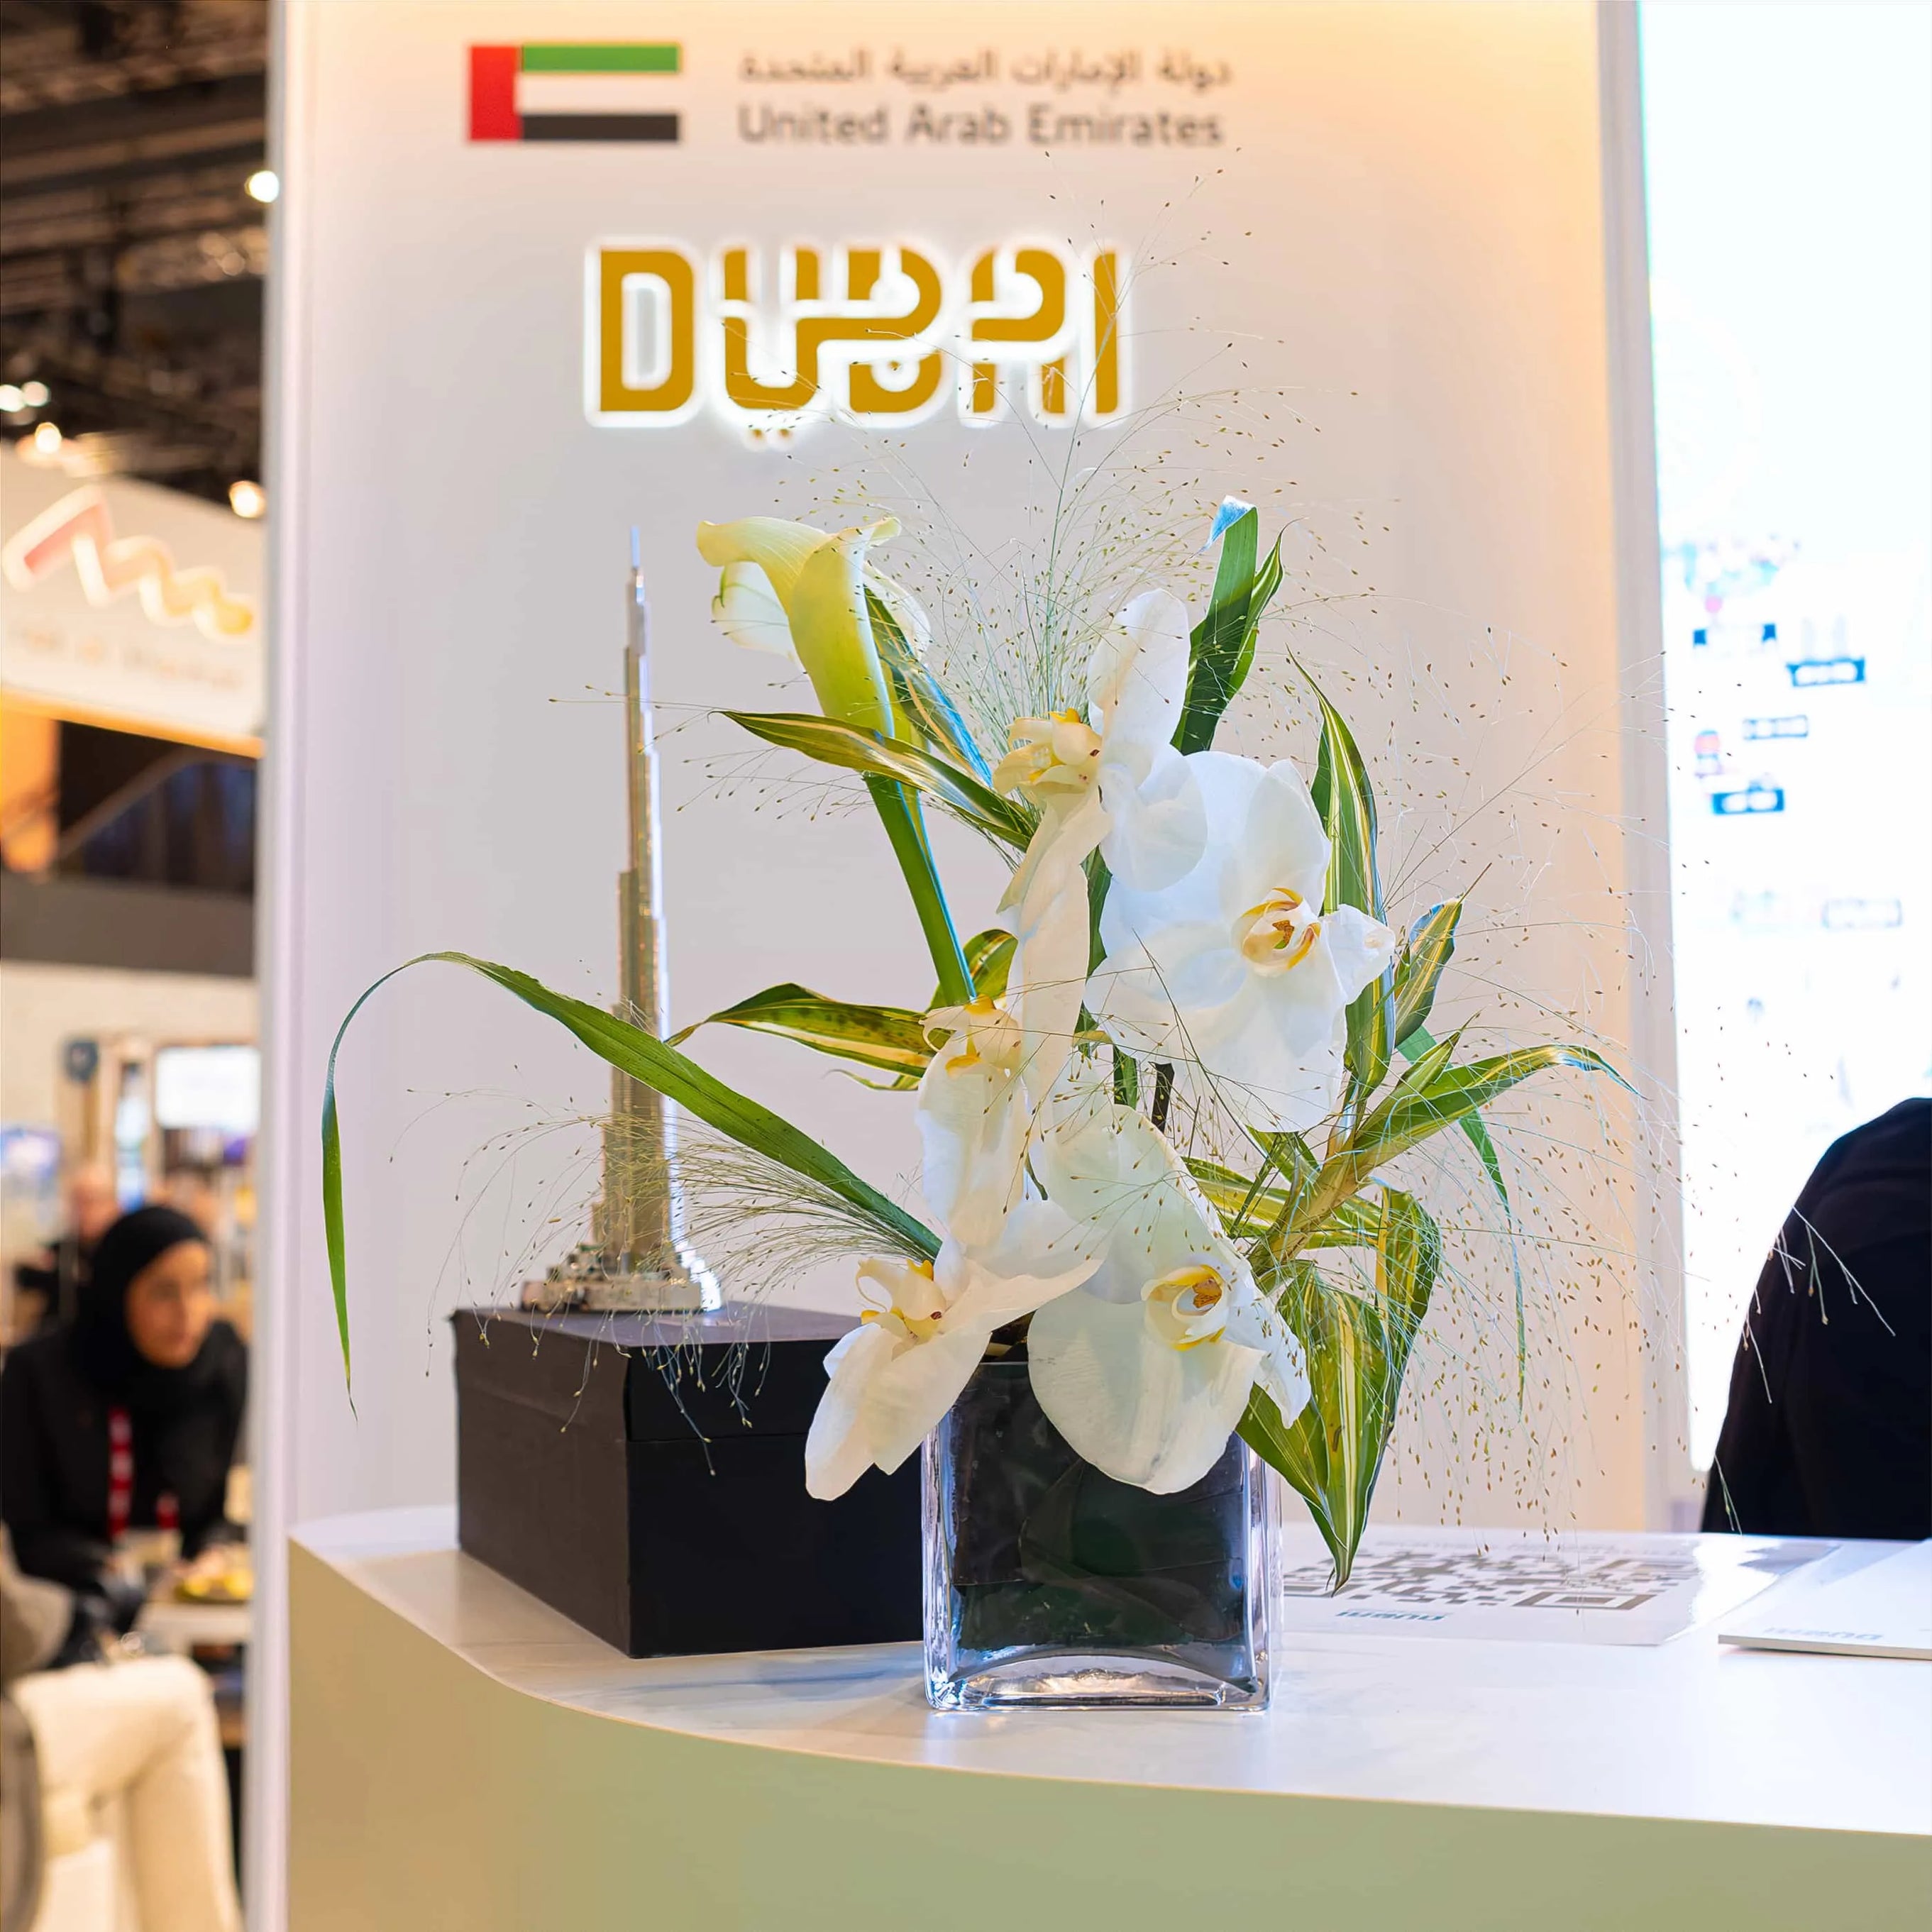 An elegant bouquet of white orchids is on display in the UAE booth at WTM in London. A minimalist yet sophisticated touch for this corporate booth.